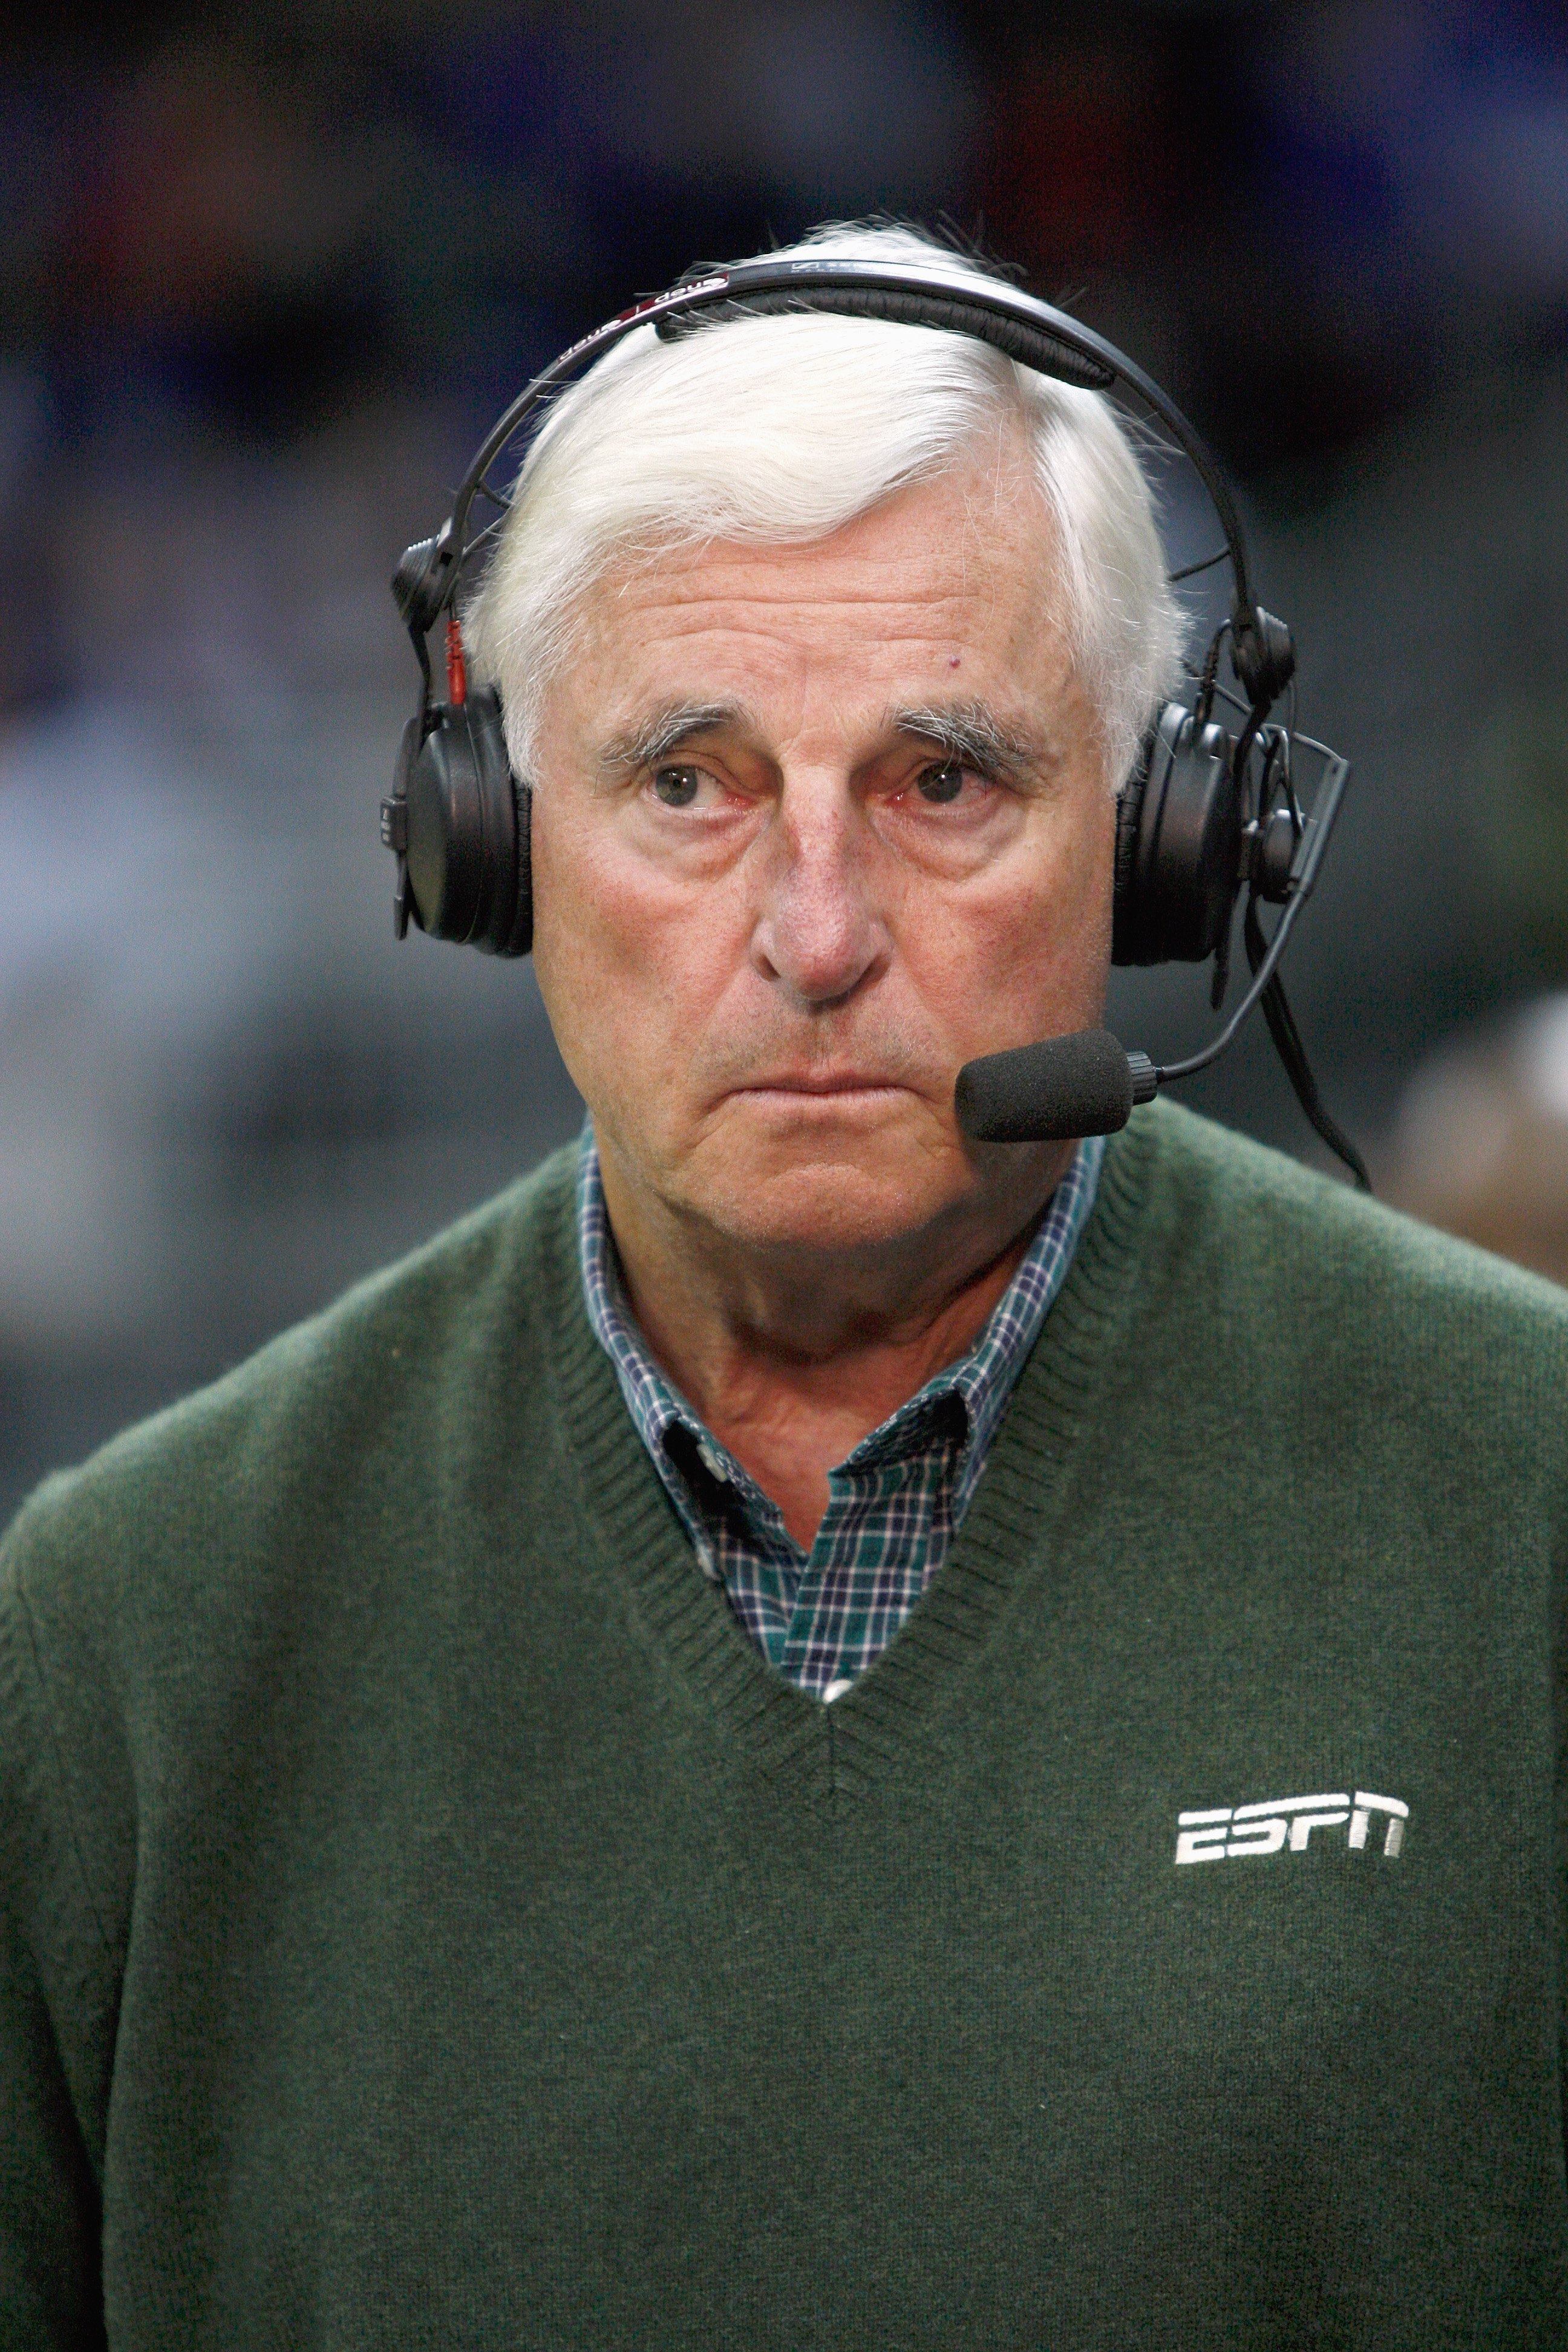 KANSAS CITY, MO - NOVEMBER 24: Bob Knight former head coach, looks on as an ESPN commentator during the CBE Classic games on November 24, 2008 at the Sprint Center in Kansas City, Missouri. (Photo by Jamie Squire/Getty Images)